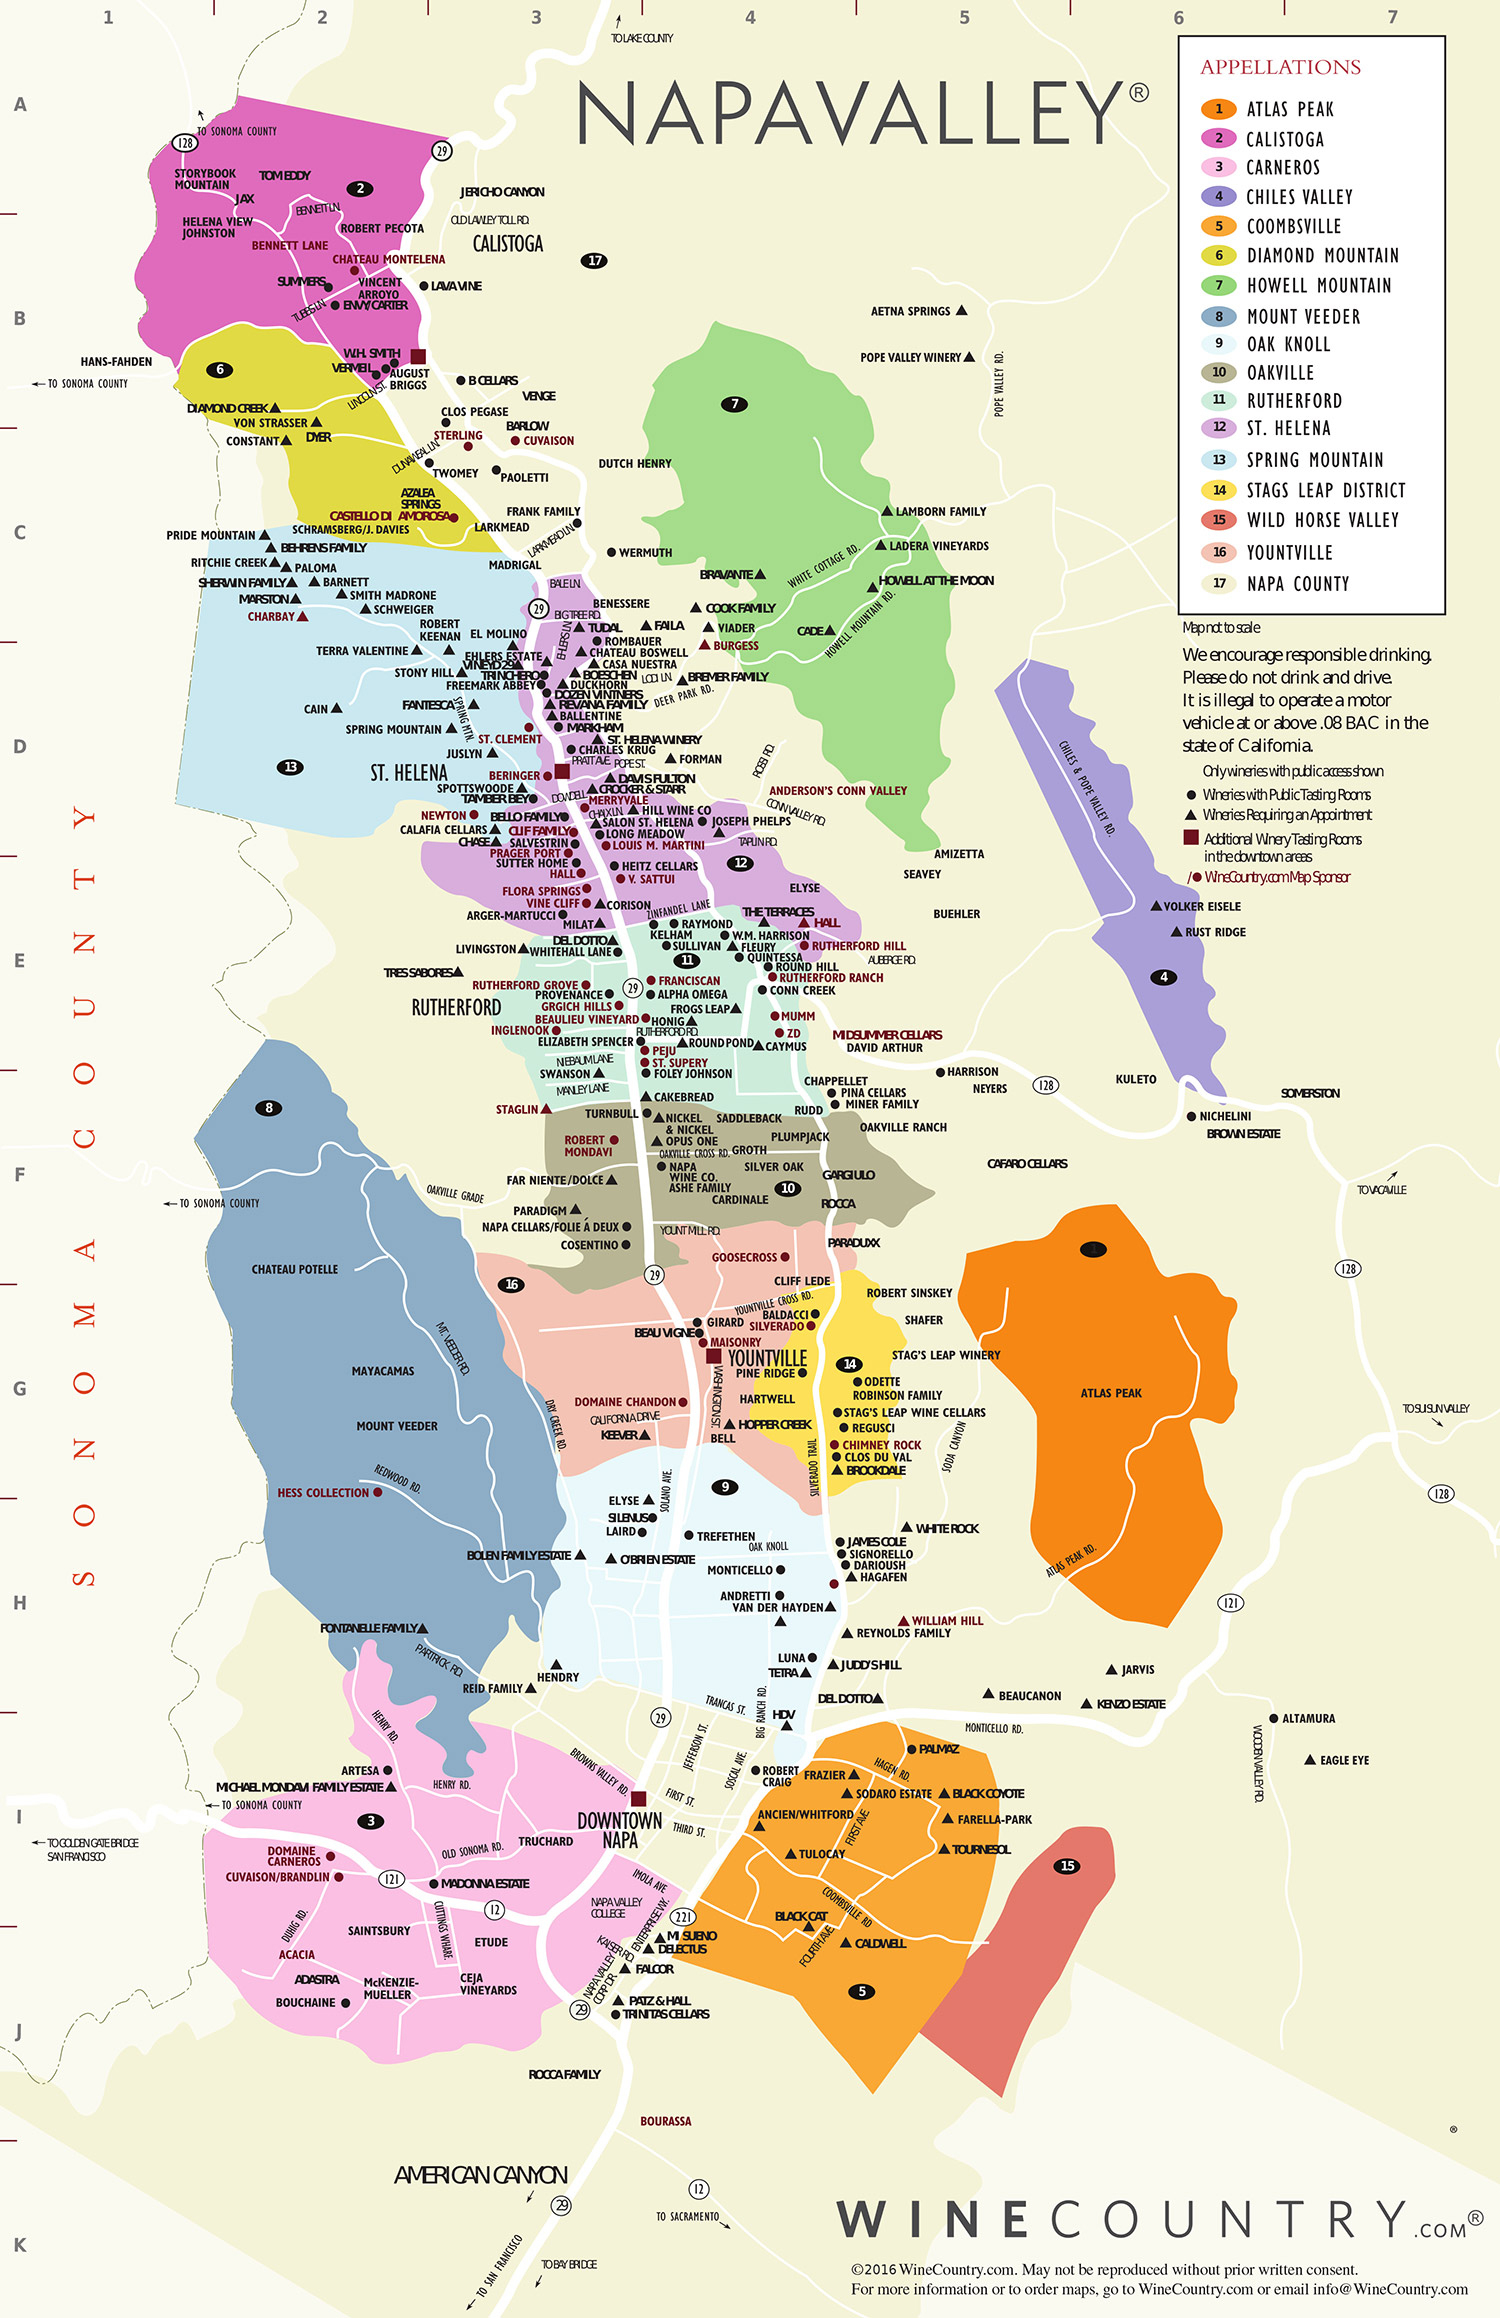 Napa Valley Wine Country Maps - Napavalley - Map Of Northern California Wine Regions